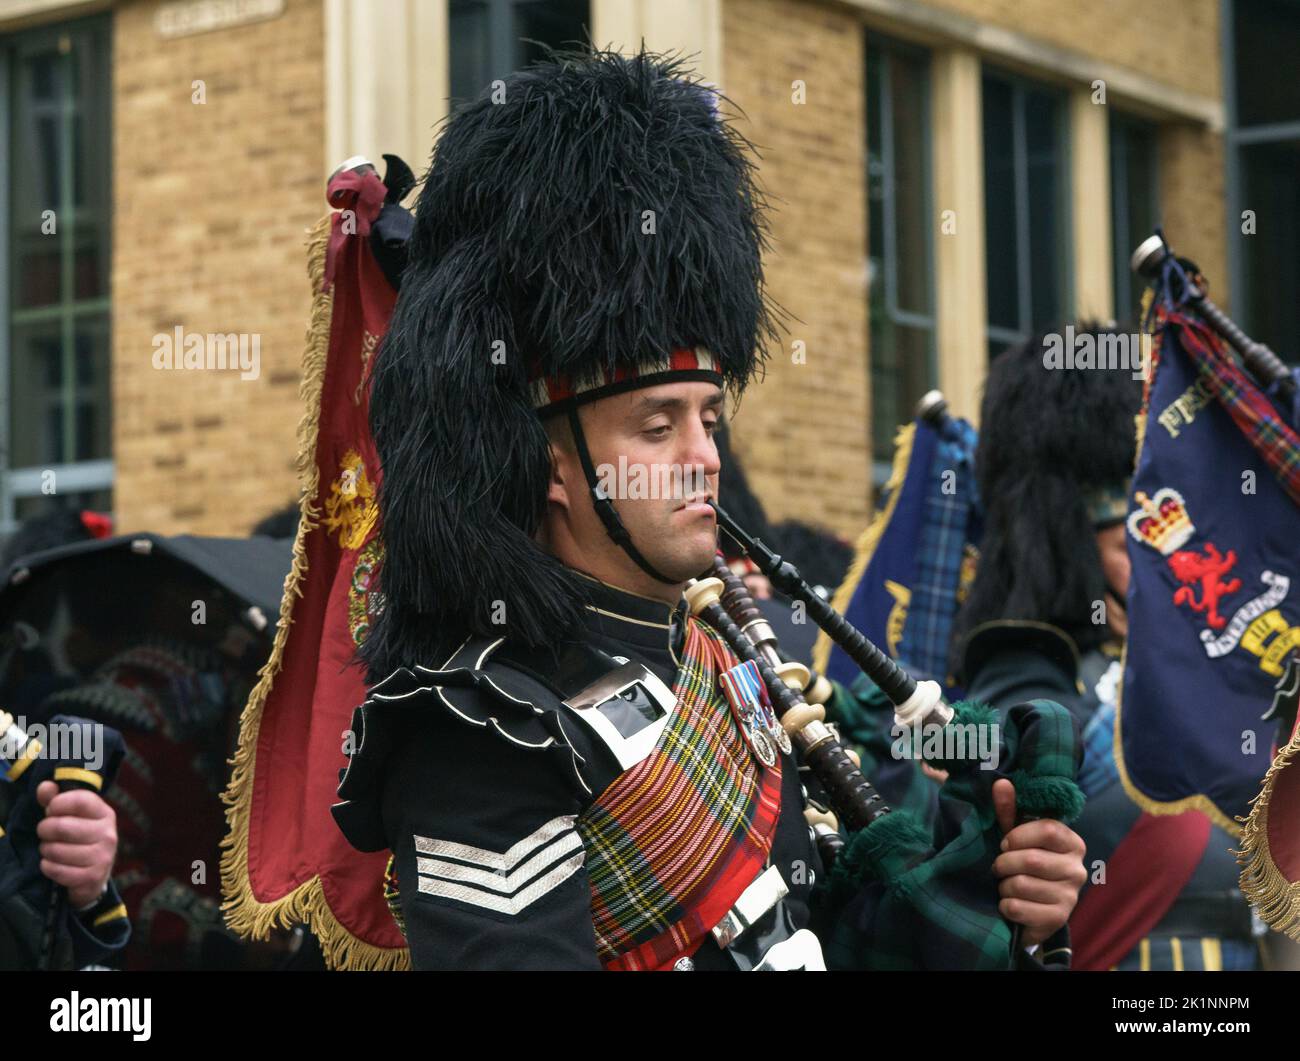 A piper marches through Windsor town, having accompanied the late Queen Elizabeth II to Windsor Castle. Stock Photo